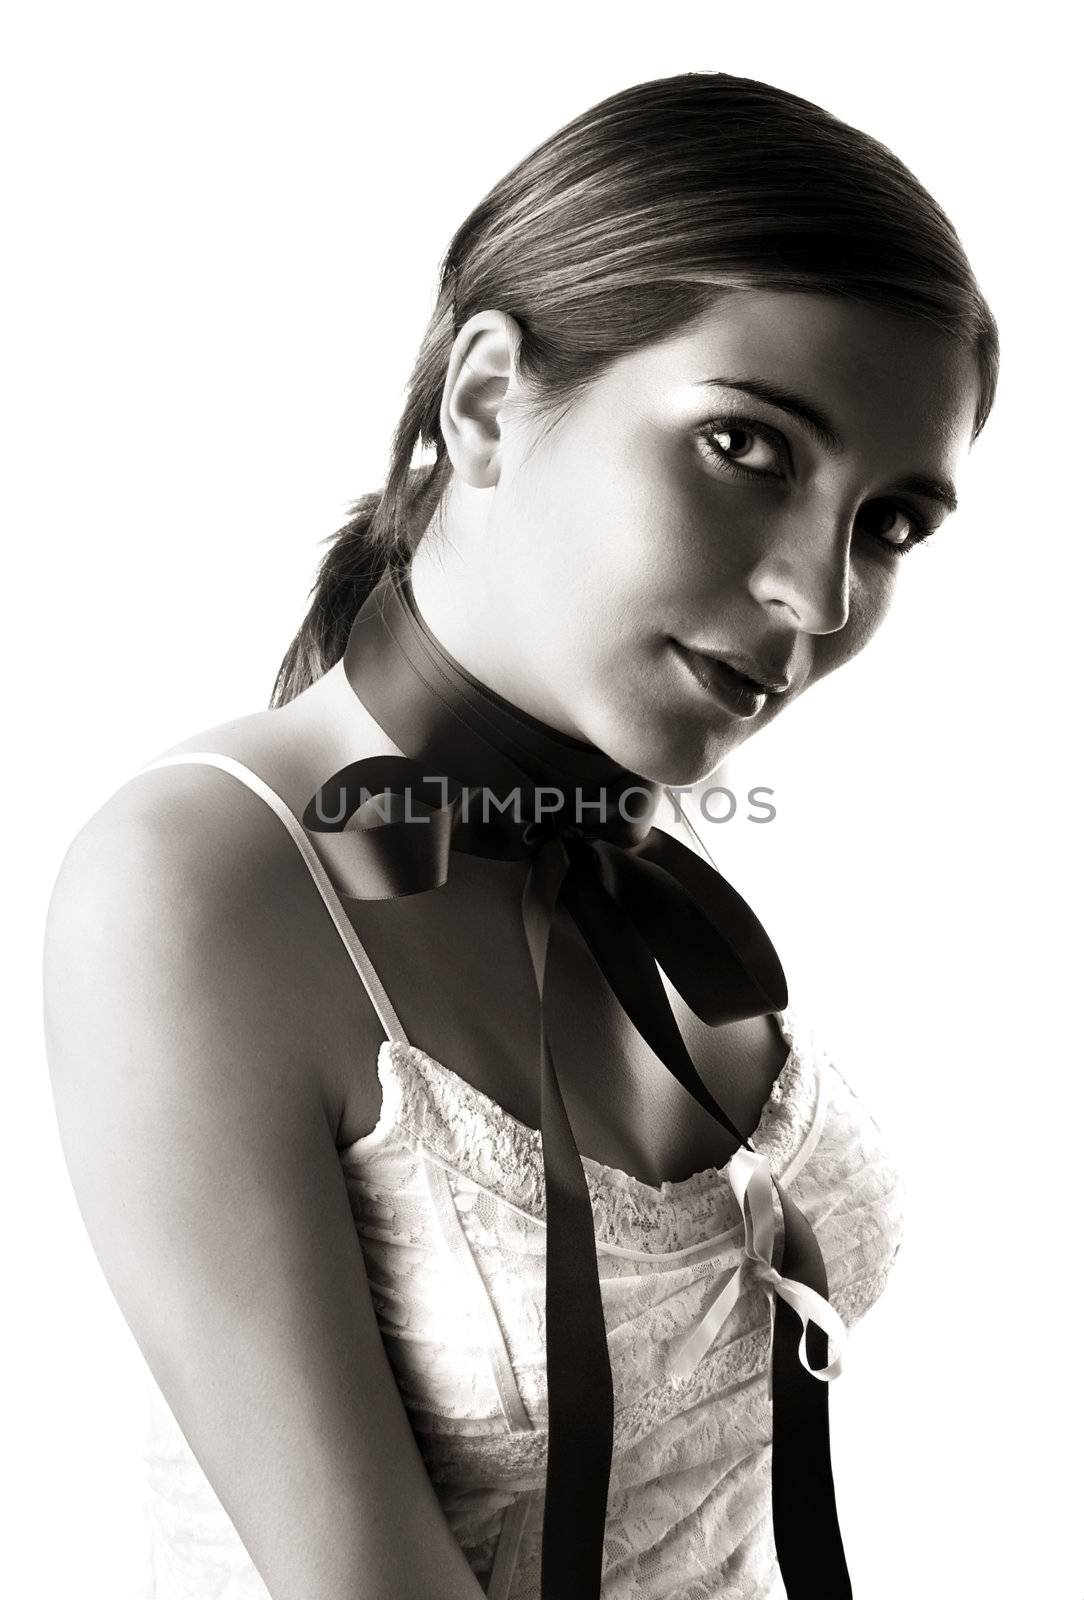 Black and White image of a beautiful woman portrait on a white background